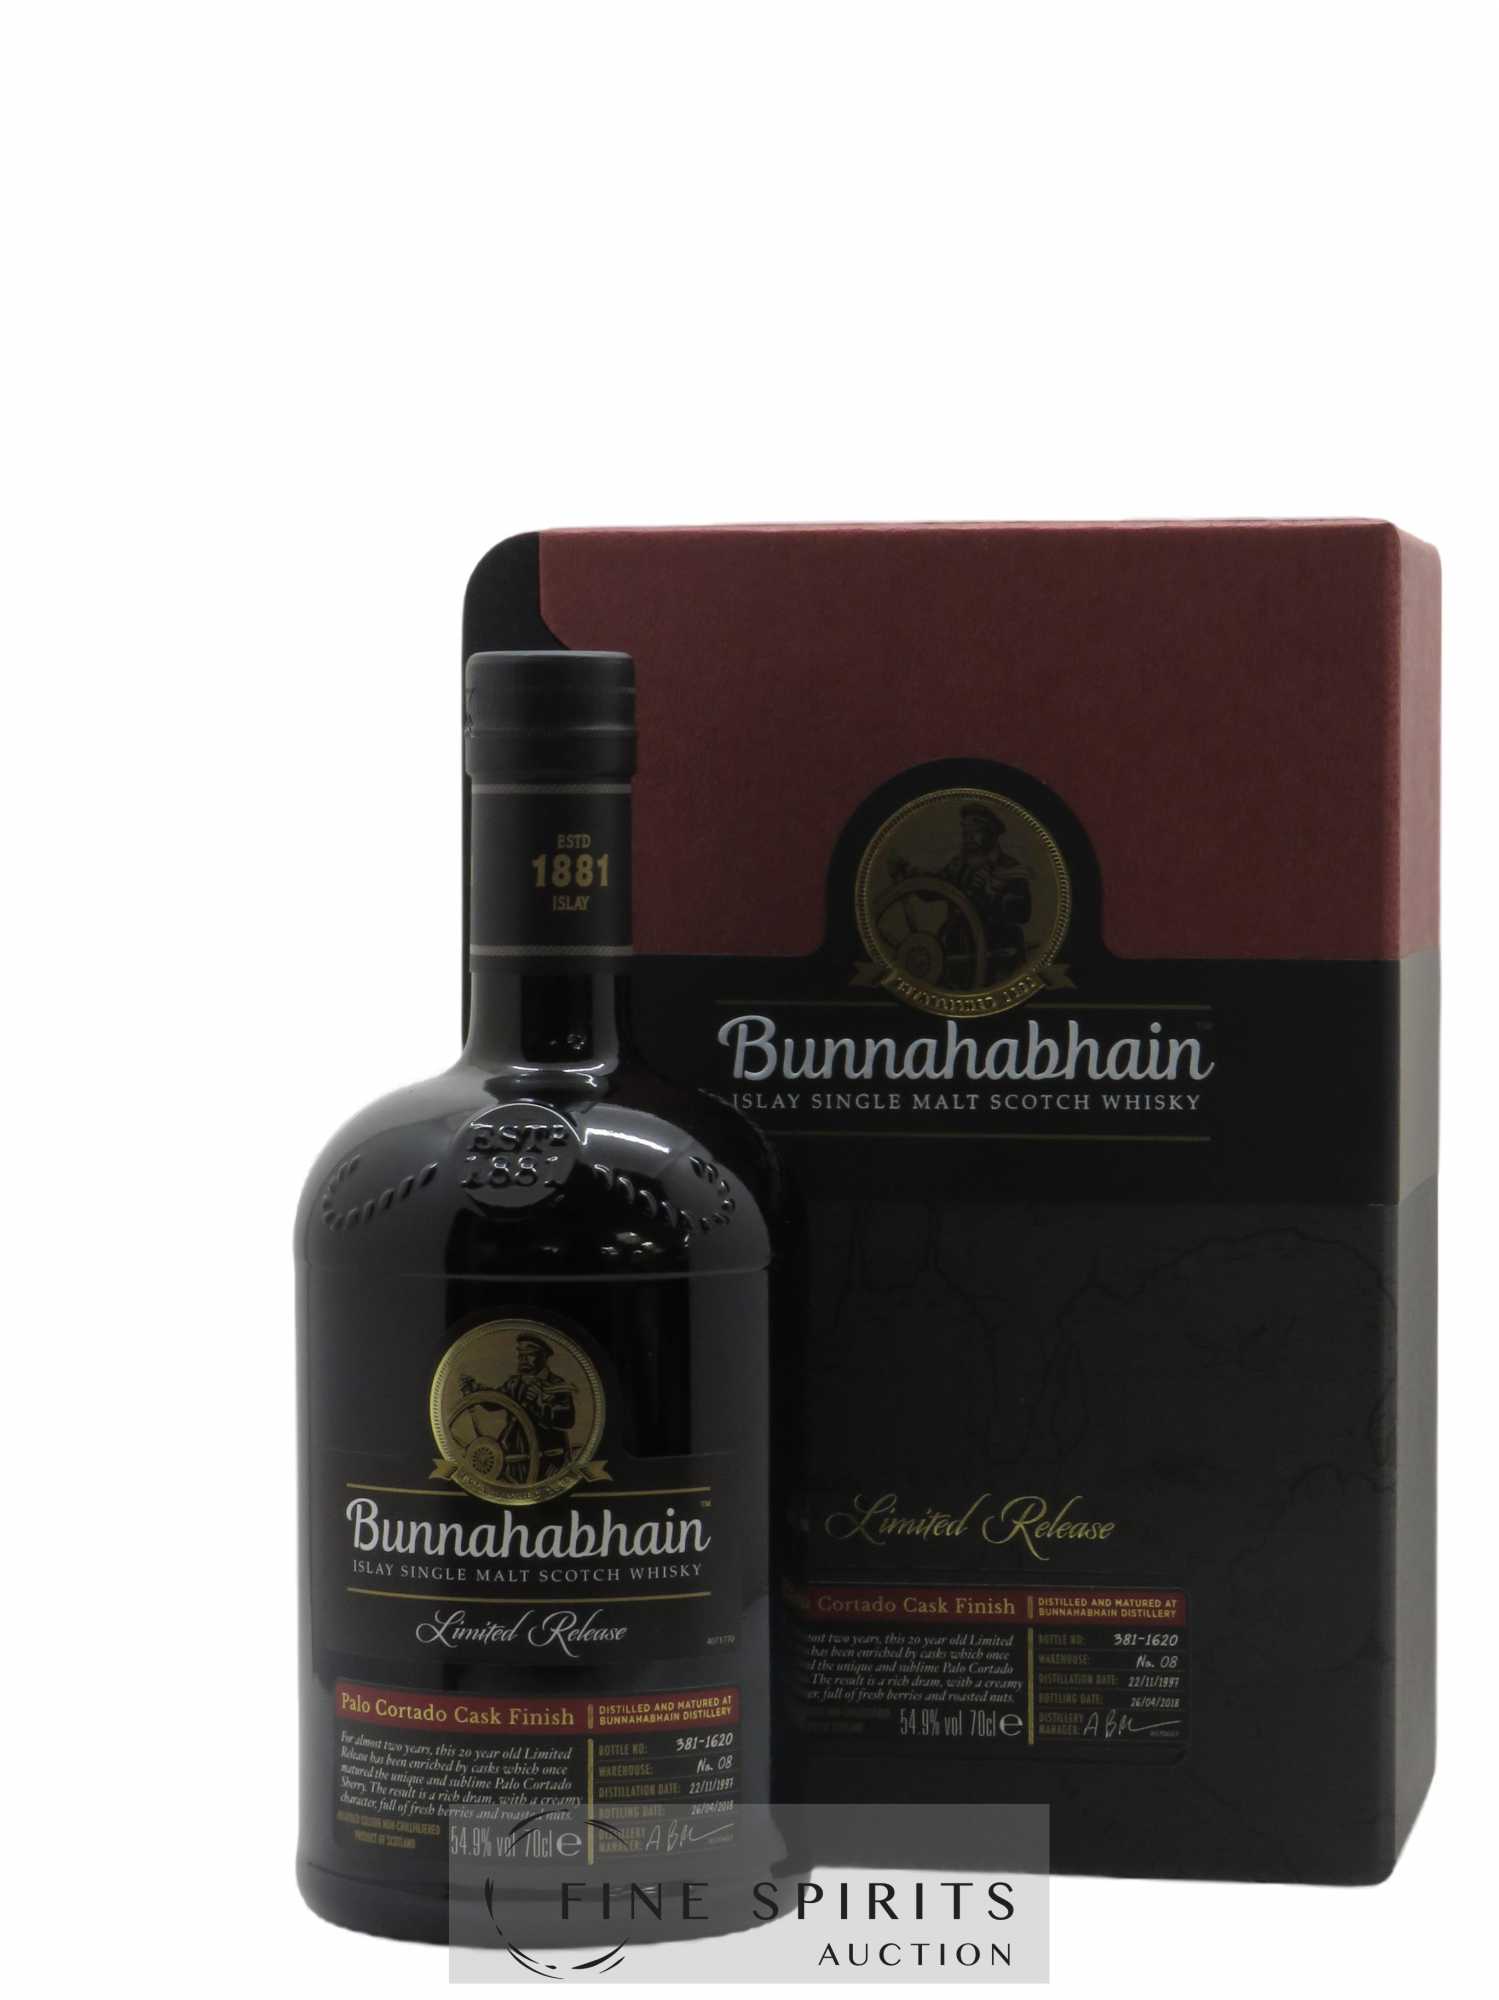 Bunnahabhain 20 years 1997 Of. Palo Cortado Cask Finish One of 1620 - bottled 2018 Limited Release